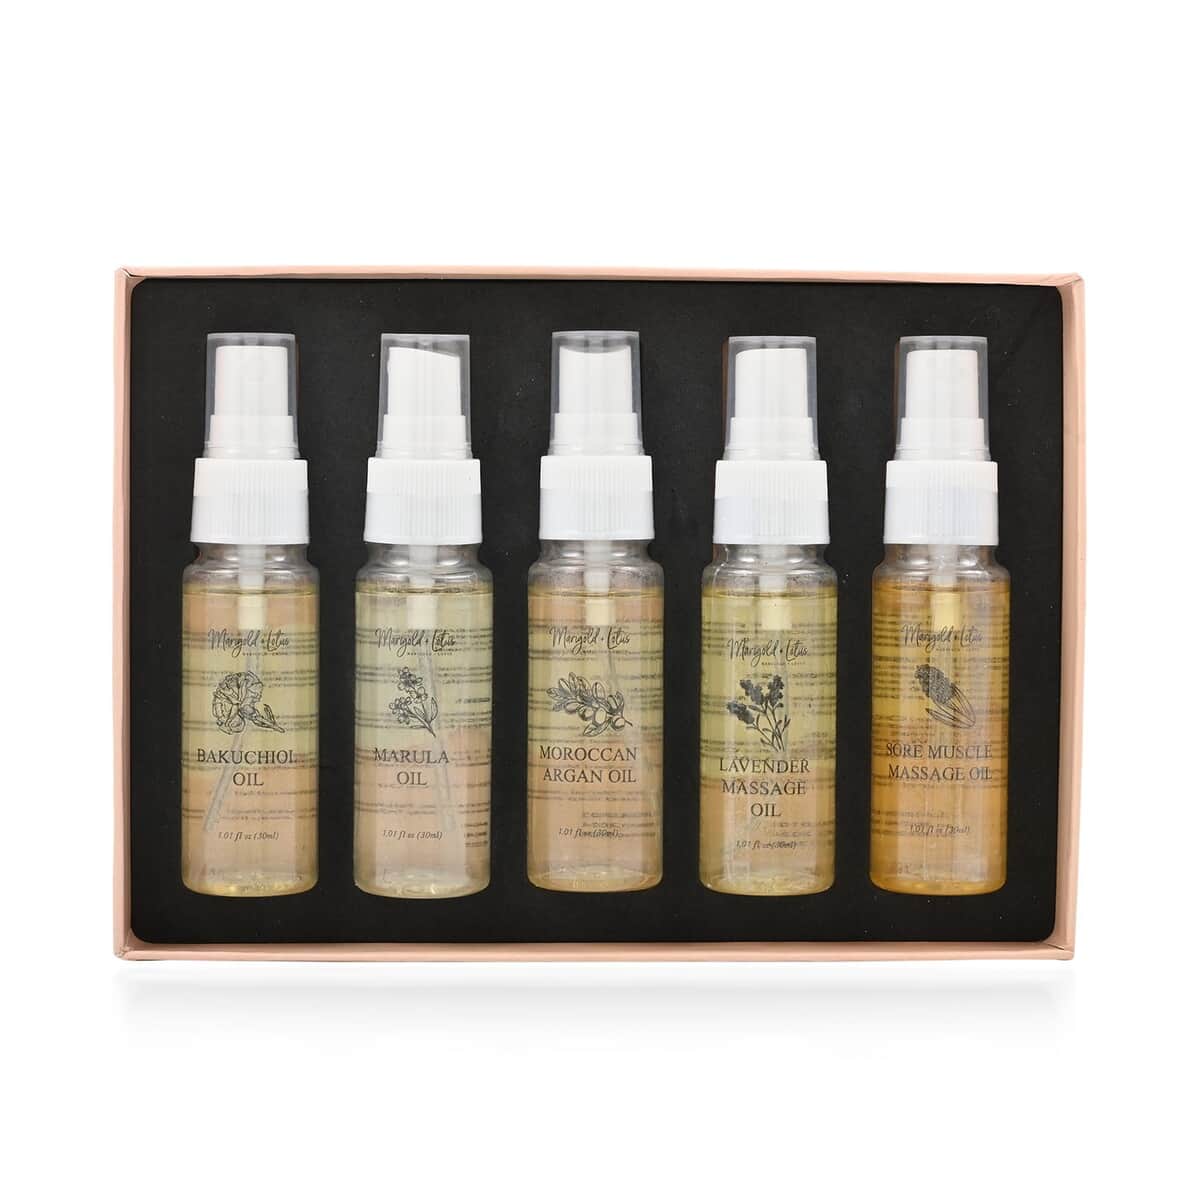 4th July Preview Deals Set of 5 Oils- Travel Edition, 2 of The Muscle Pain Relief Oils, 1 Marula, 1 Argan and 1 Bakuchi Oil (30 ml Each) Spray Bottles image number 2